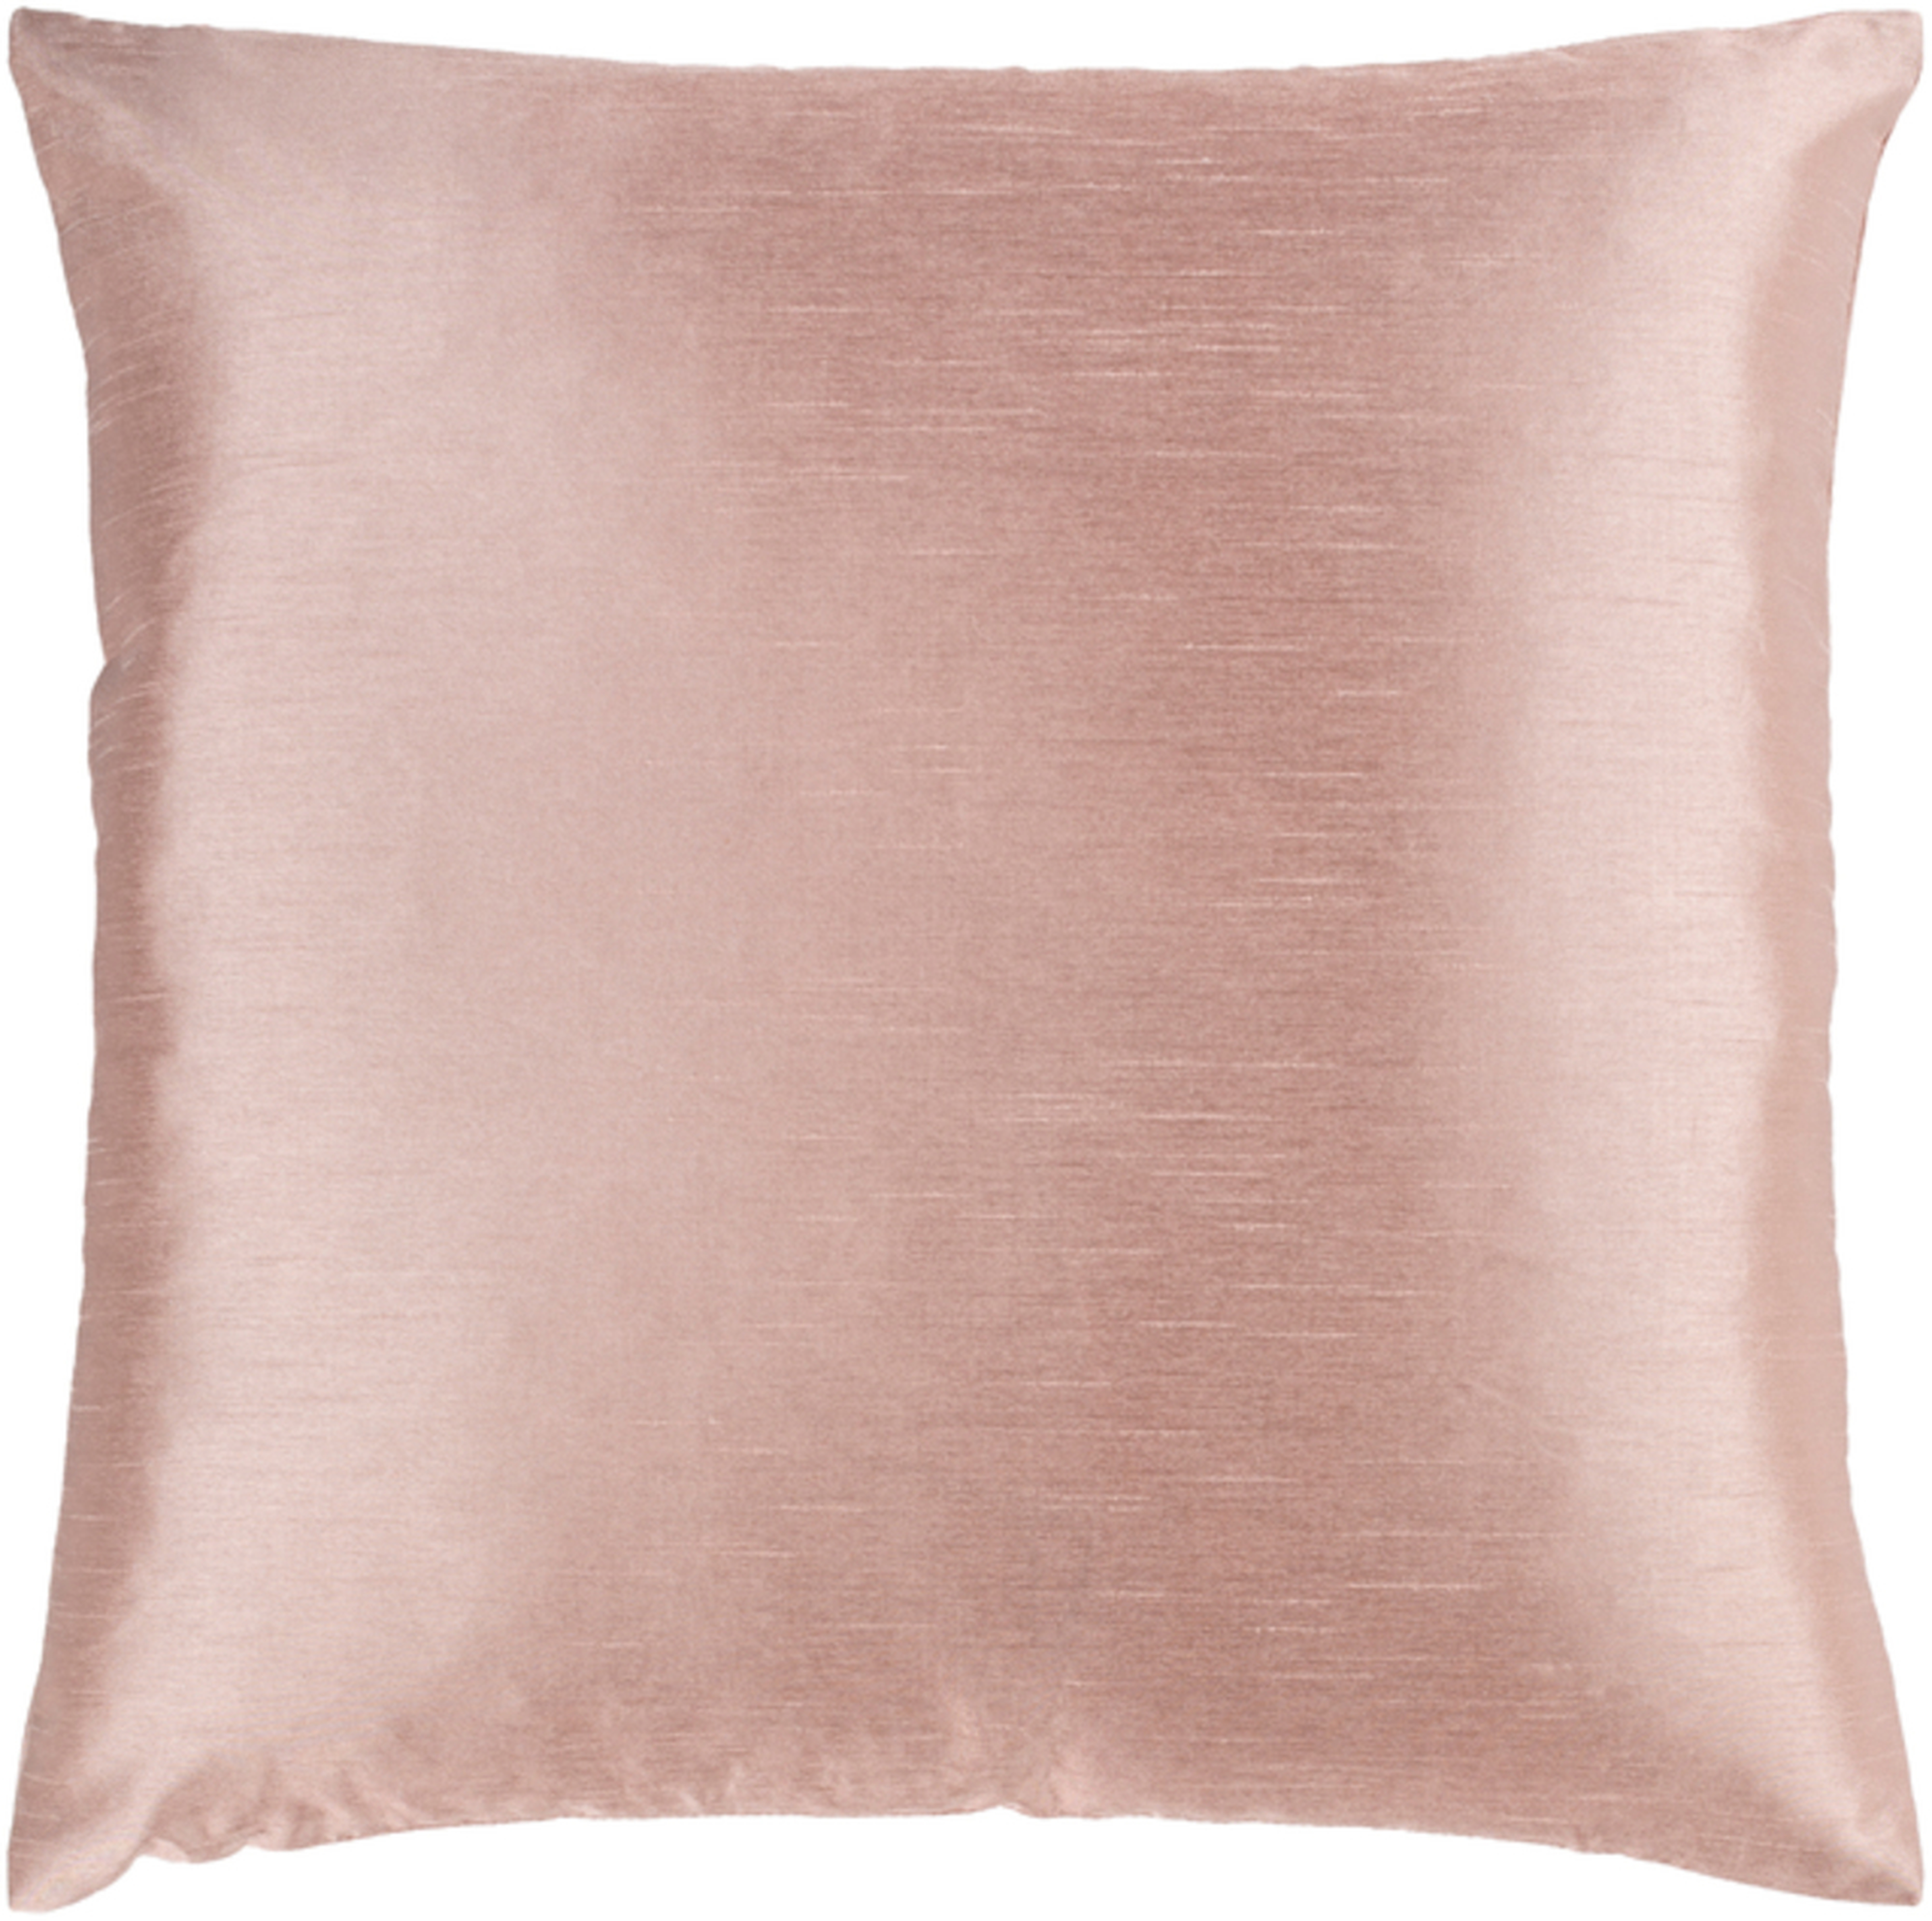 Solid Luxe - HH-134 - 18" x 18" - pillow cover only - Surya